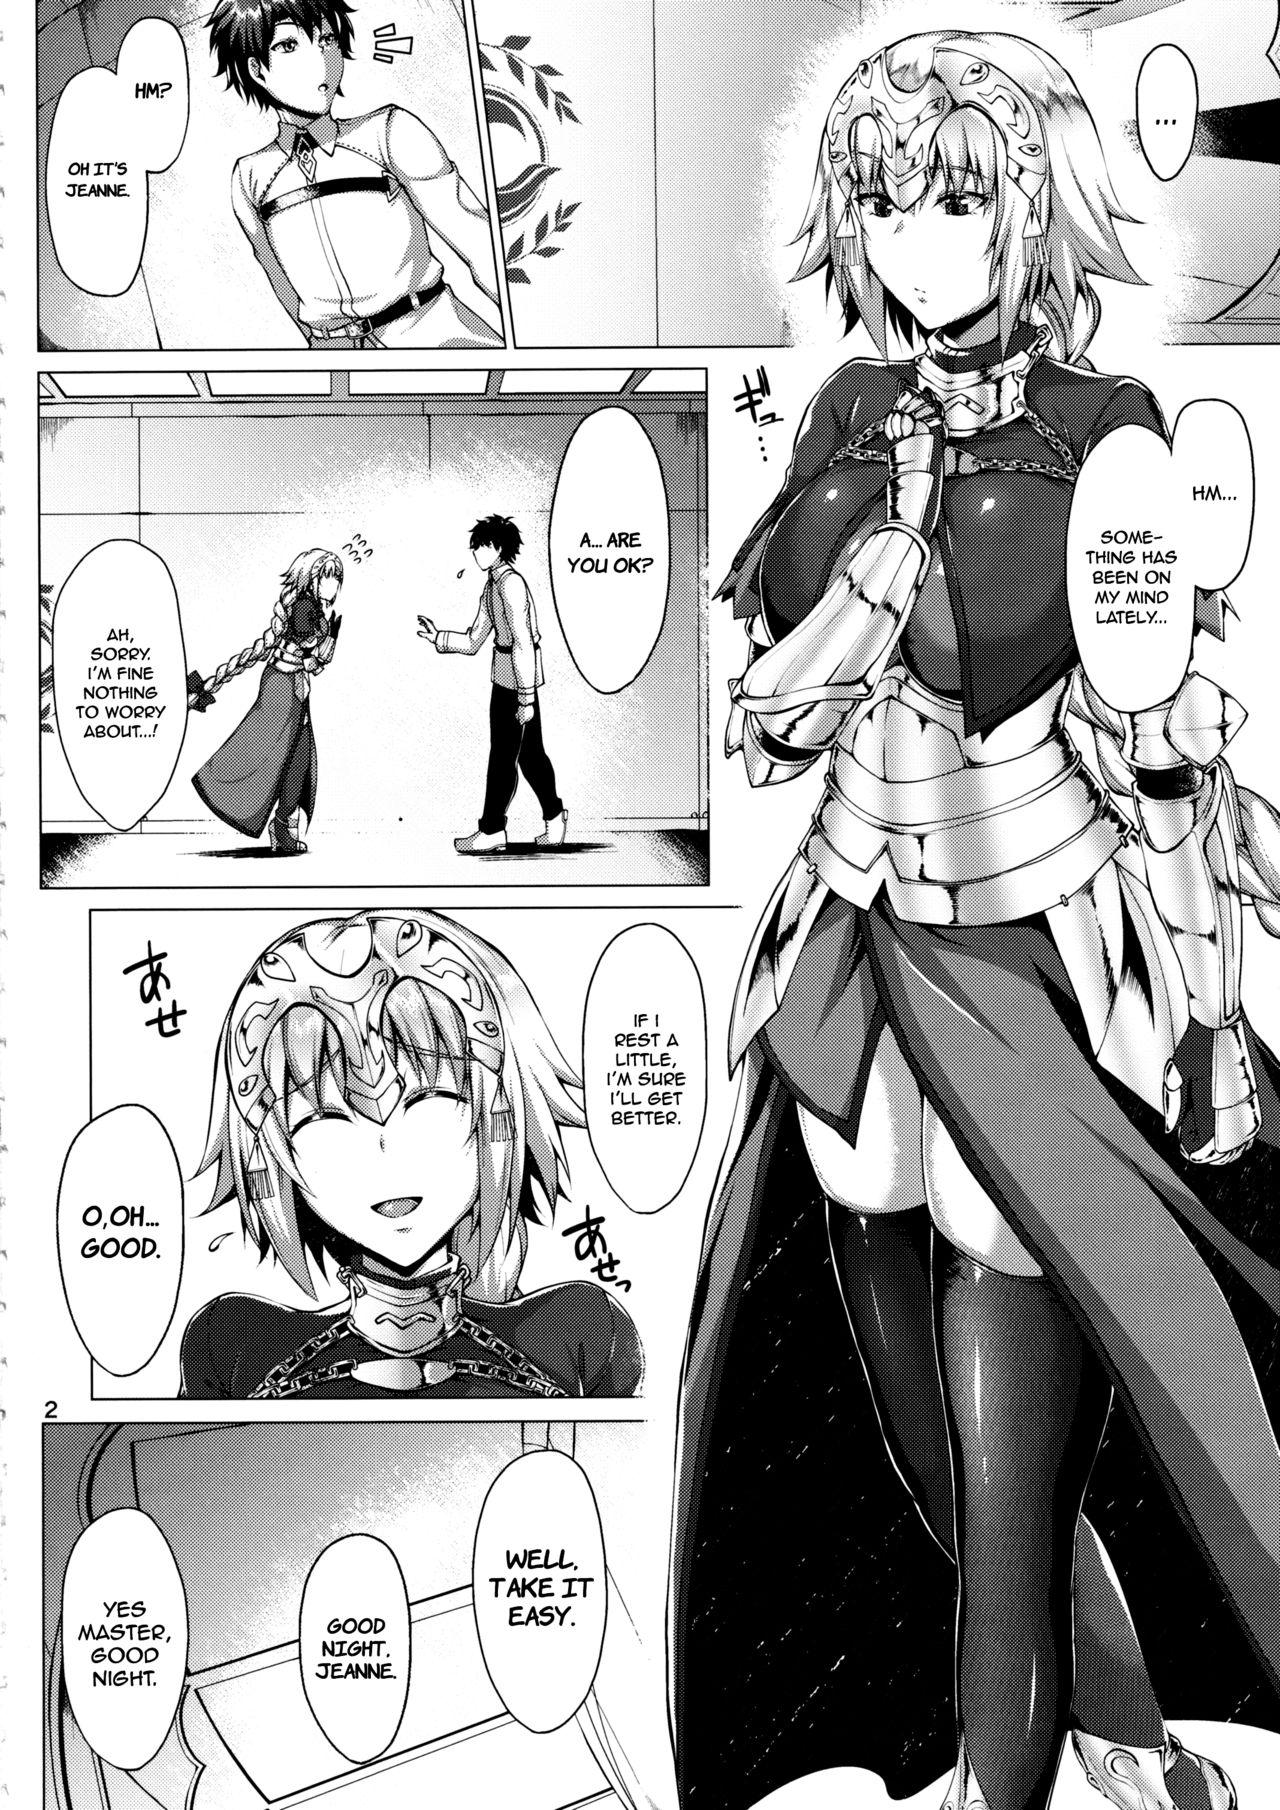 Real Amature Porn Seijo no Mita Yume 2 - Fate grand order Amateurs - Page 3